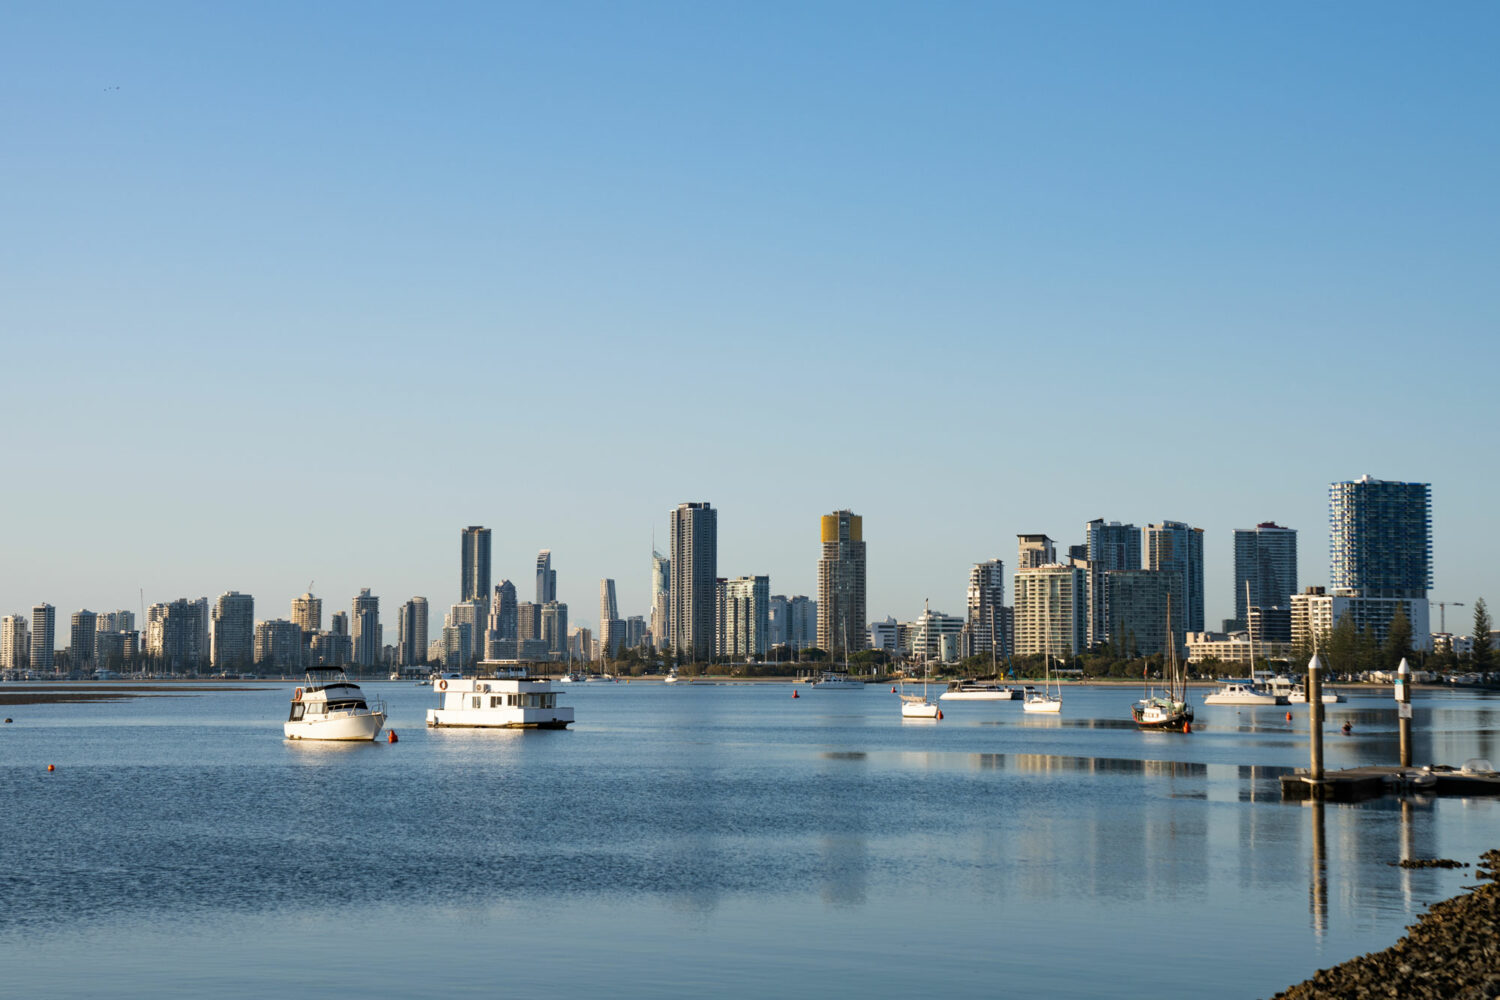 Looking towards the Gold Coast city skyline across the Broadwater from the Park Shore 2 & 3 bedroom apartments in Labrador. There are a number of boats in the foreground and highrise buildings in the background.